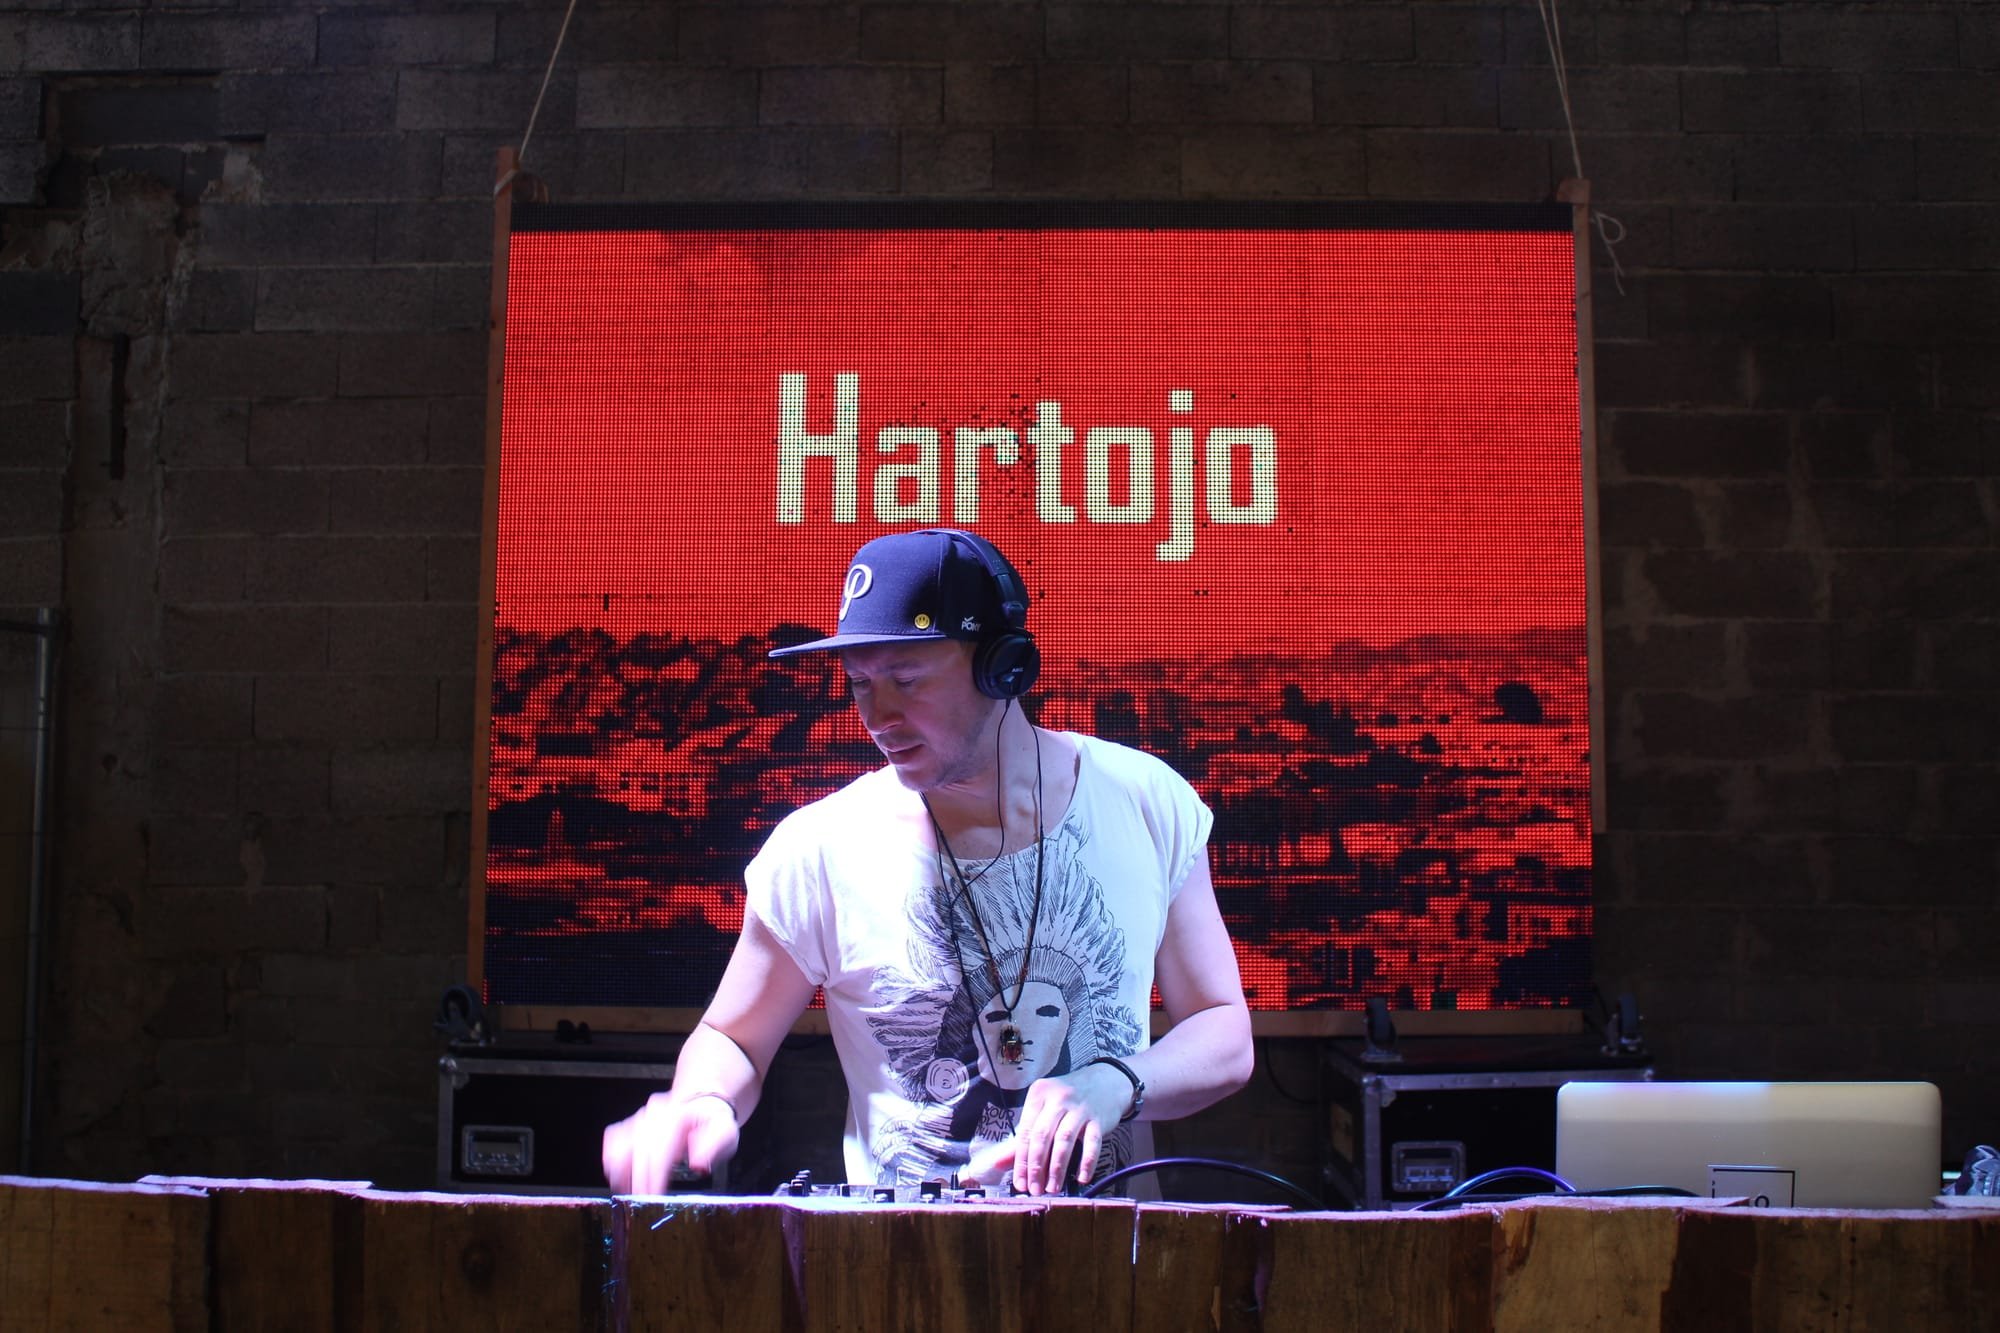 Hartojo from It Sounds Future Berlin to perform second show.